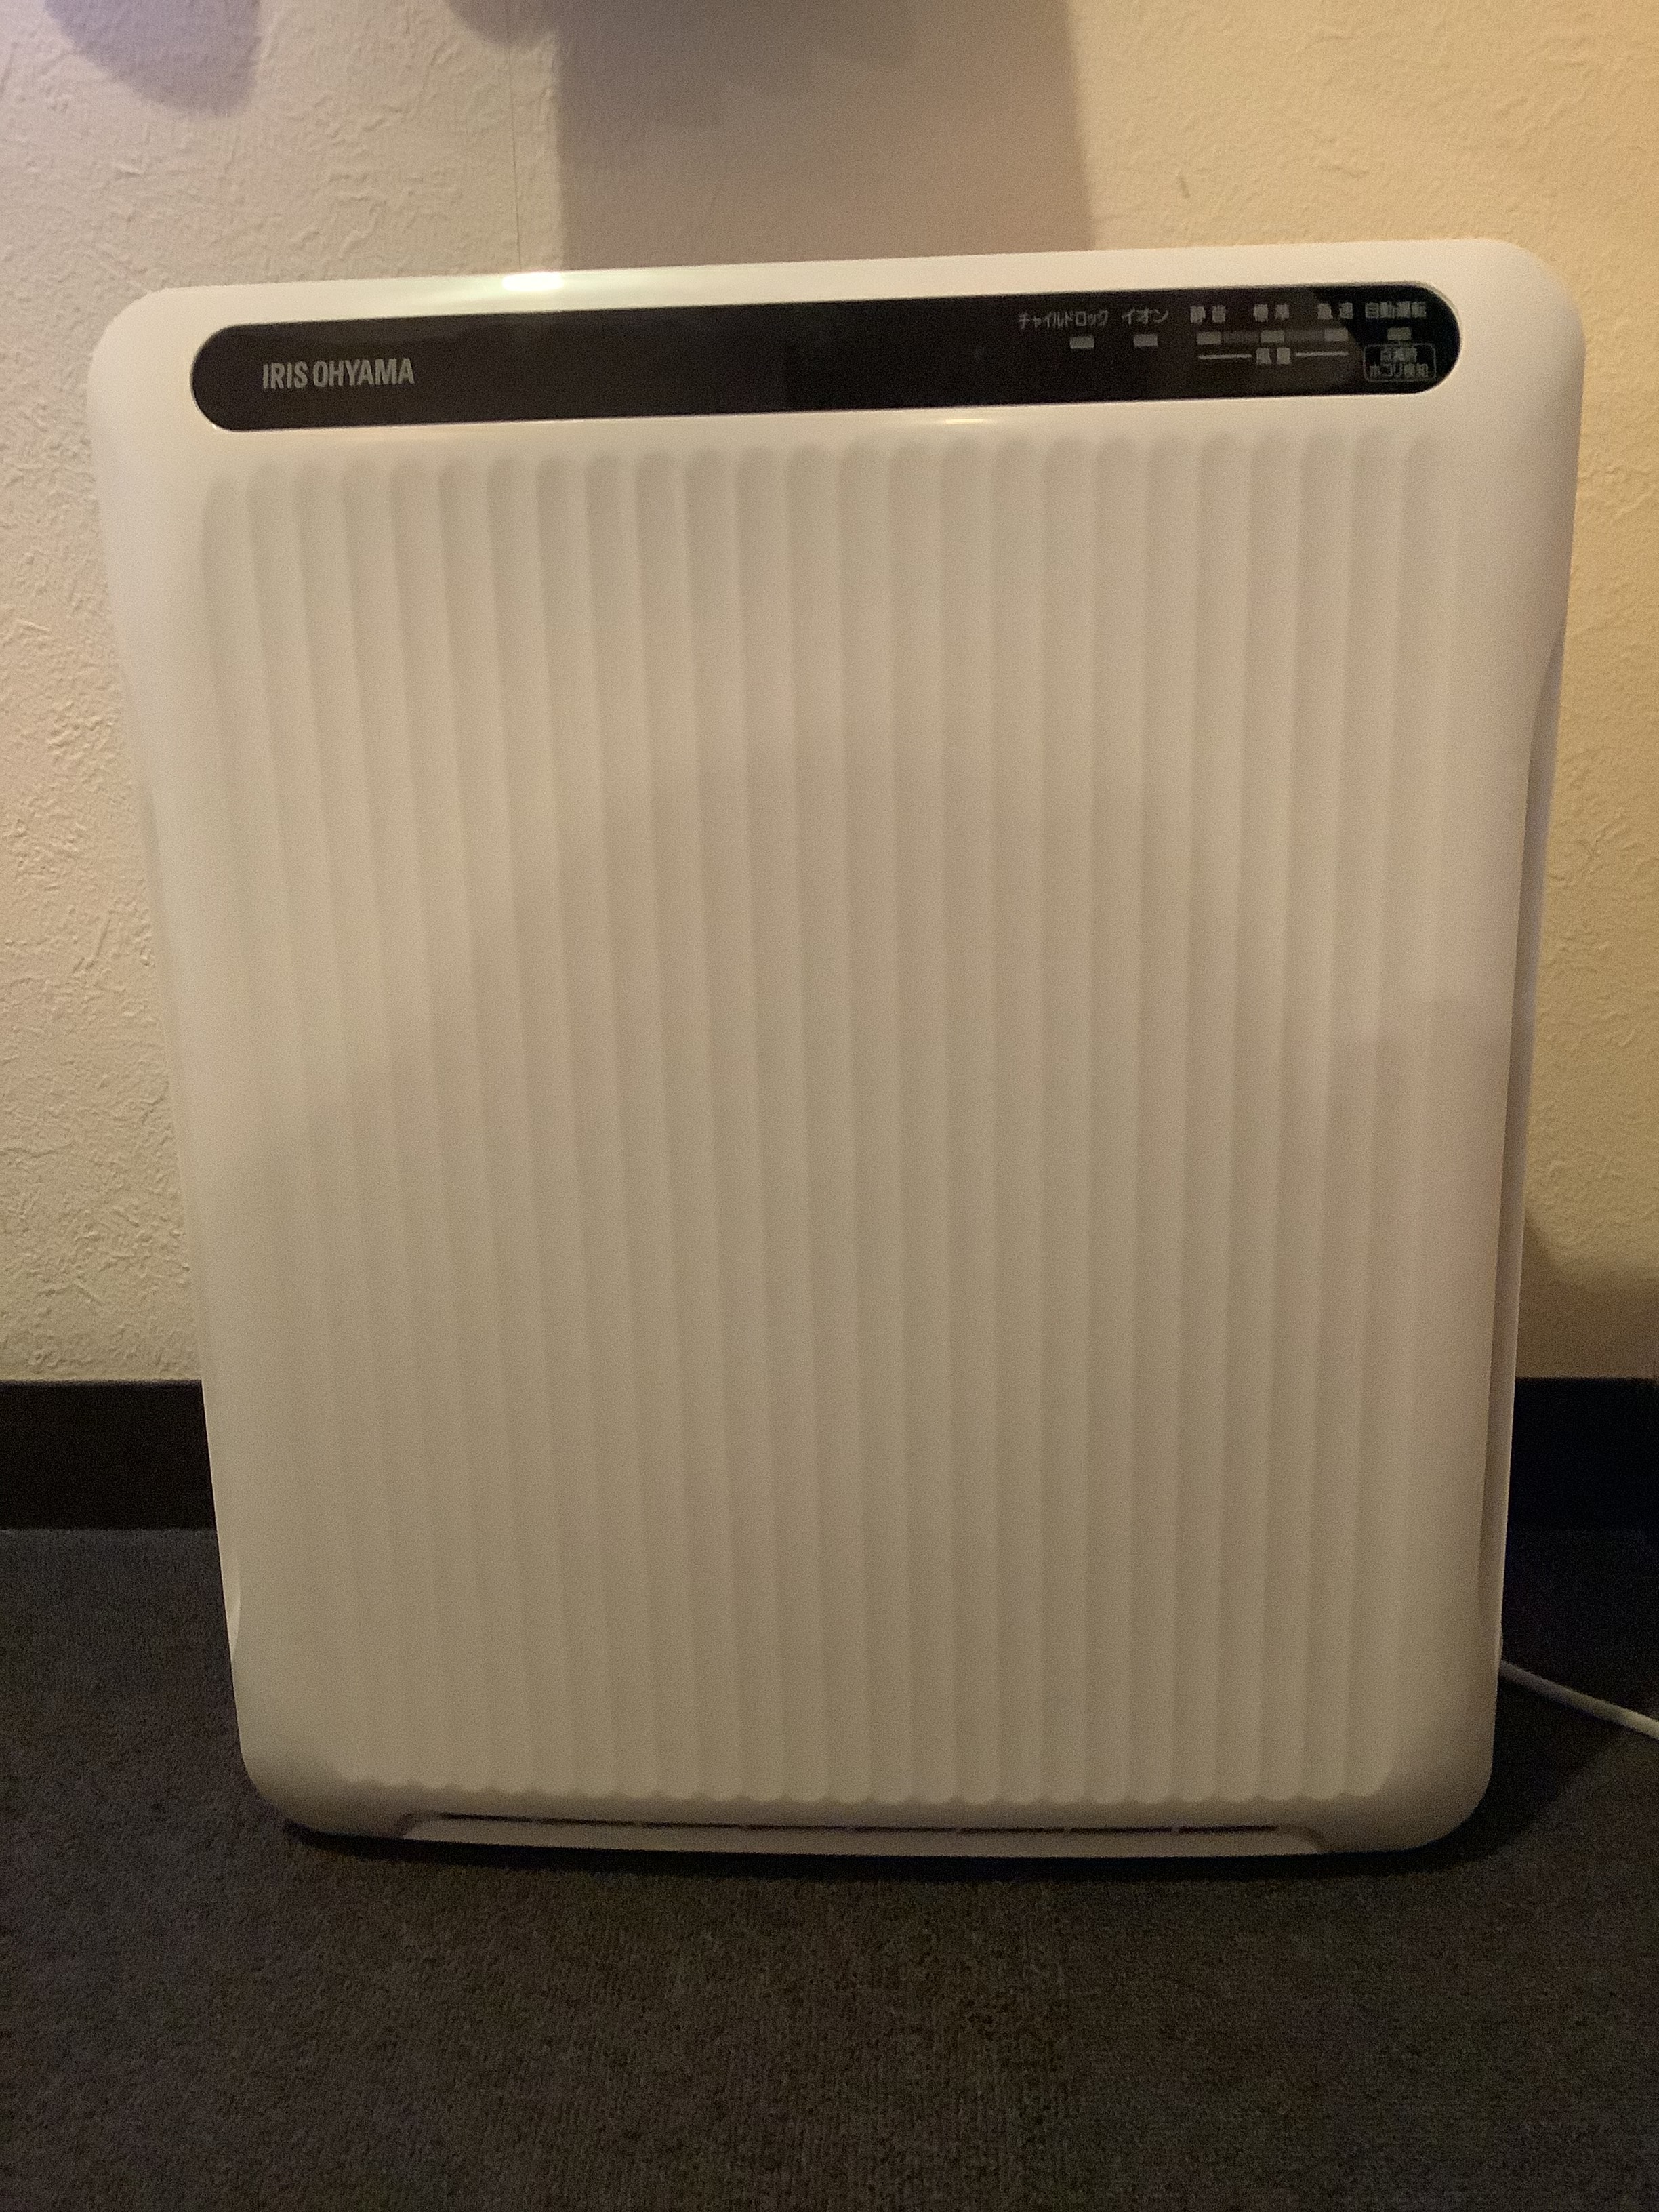 All rooms are equipped with air purifiers